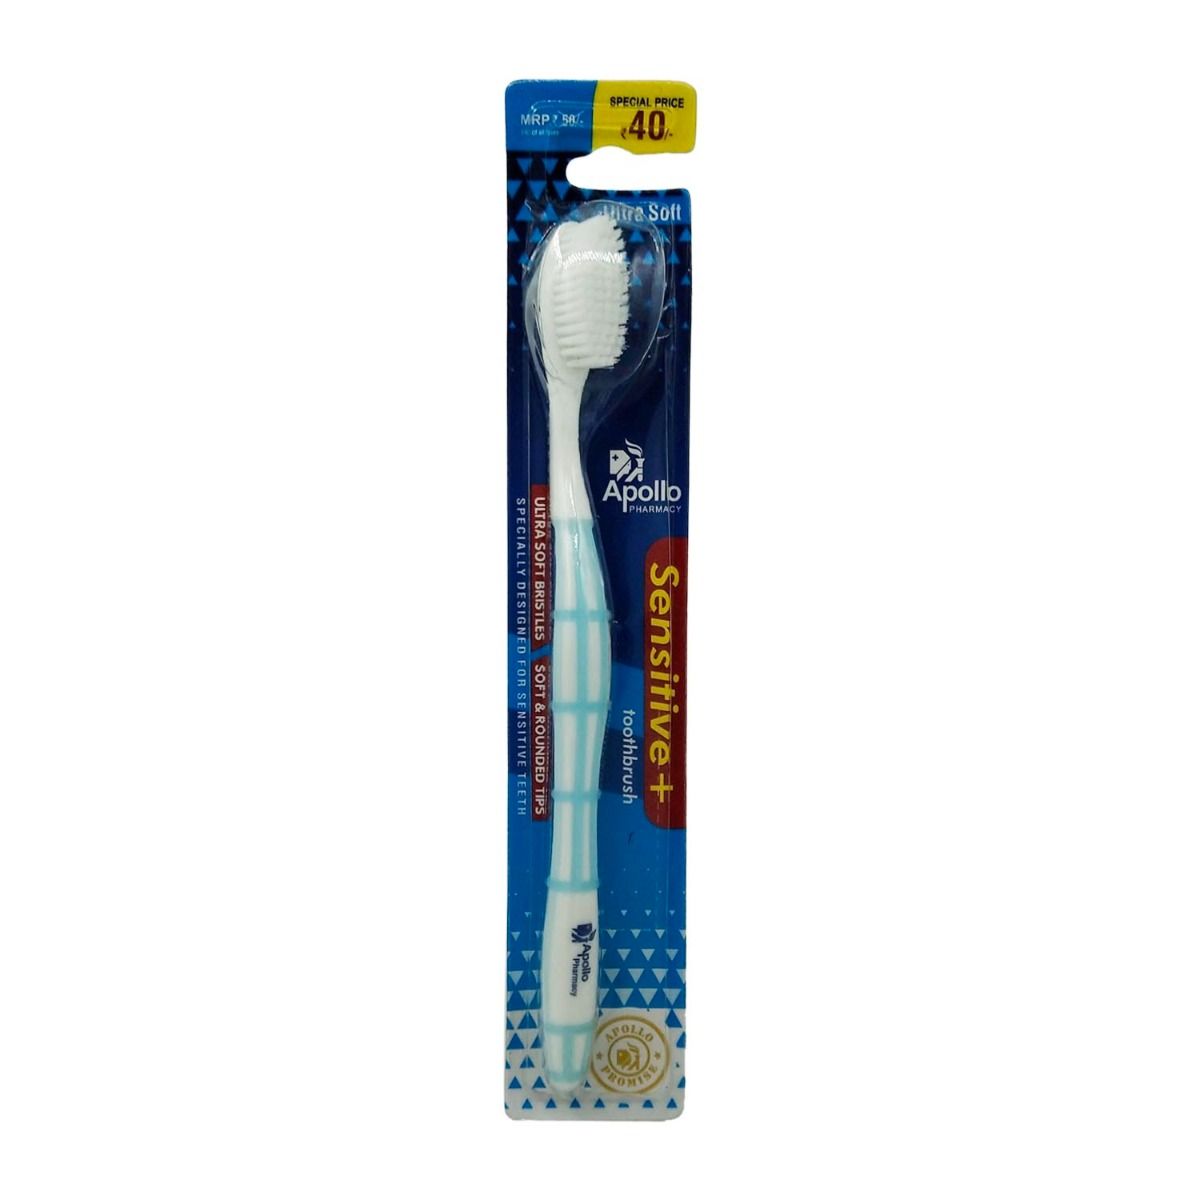 Apollo Pharmacy Sensitive+ Toothbrush, 1 Count, Pack of 1 